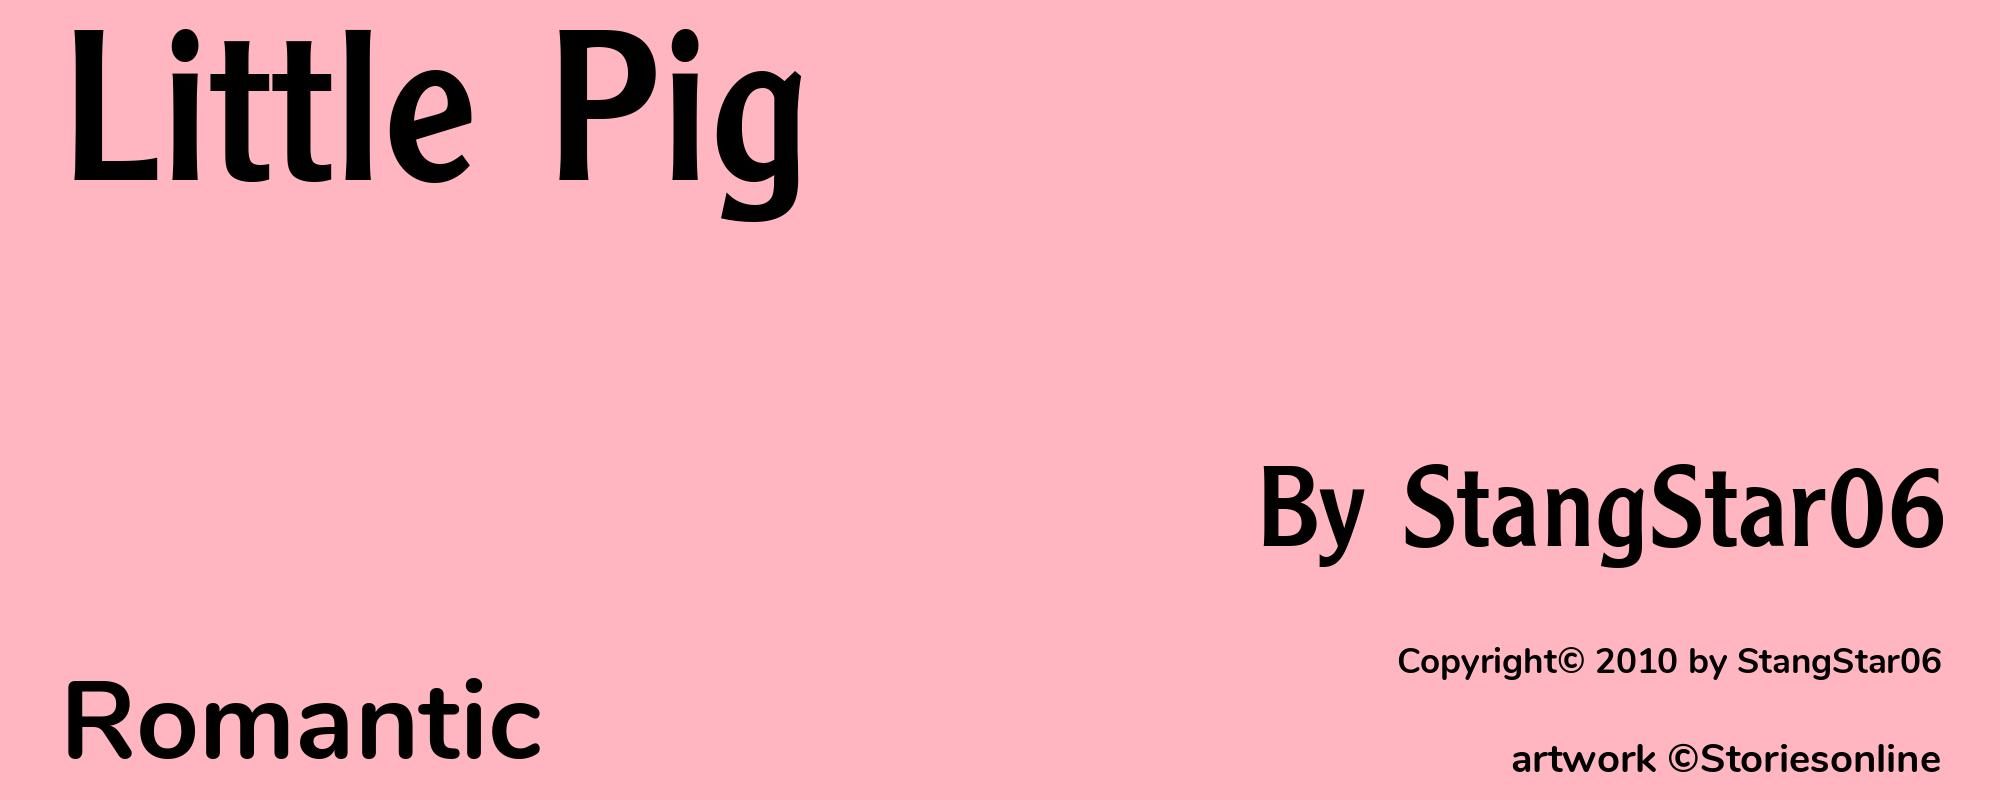 Little Pig - Cover